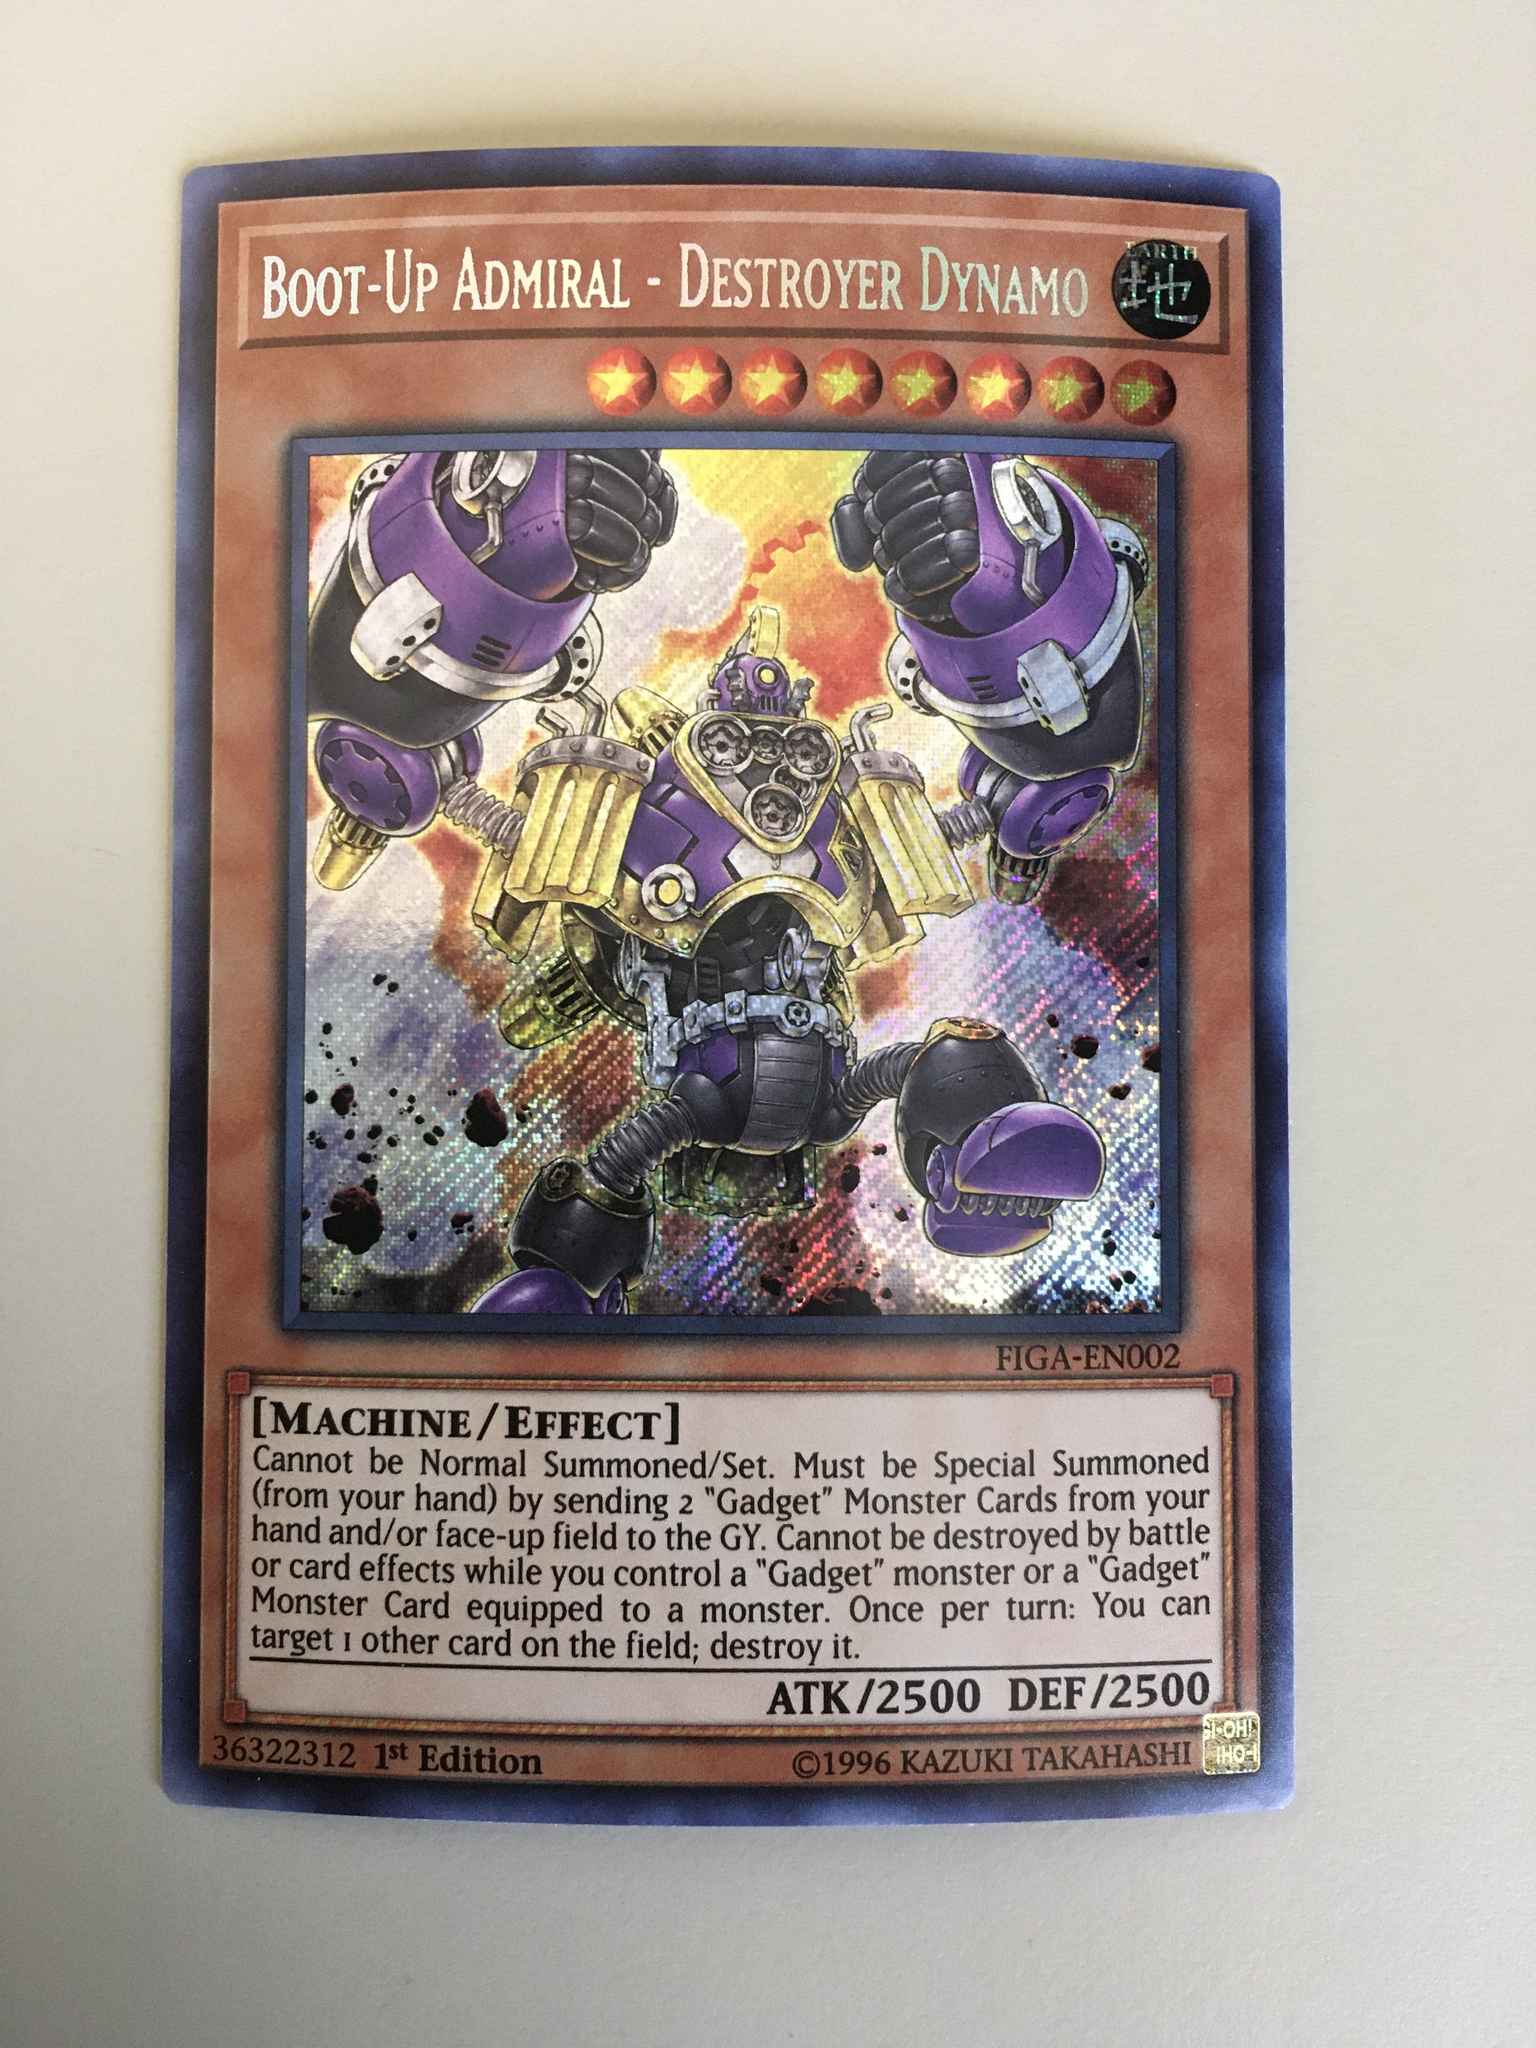 Destroyer Dynamo 1st Edition NM FIGA-EN002 Boot-Up Admiral